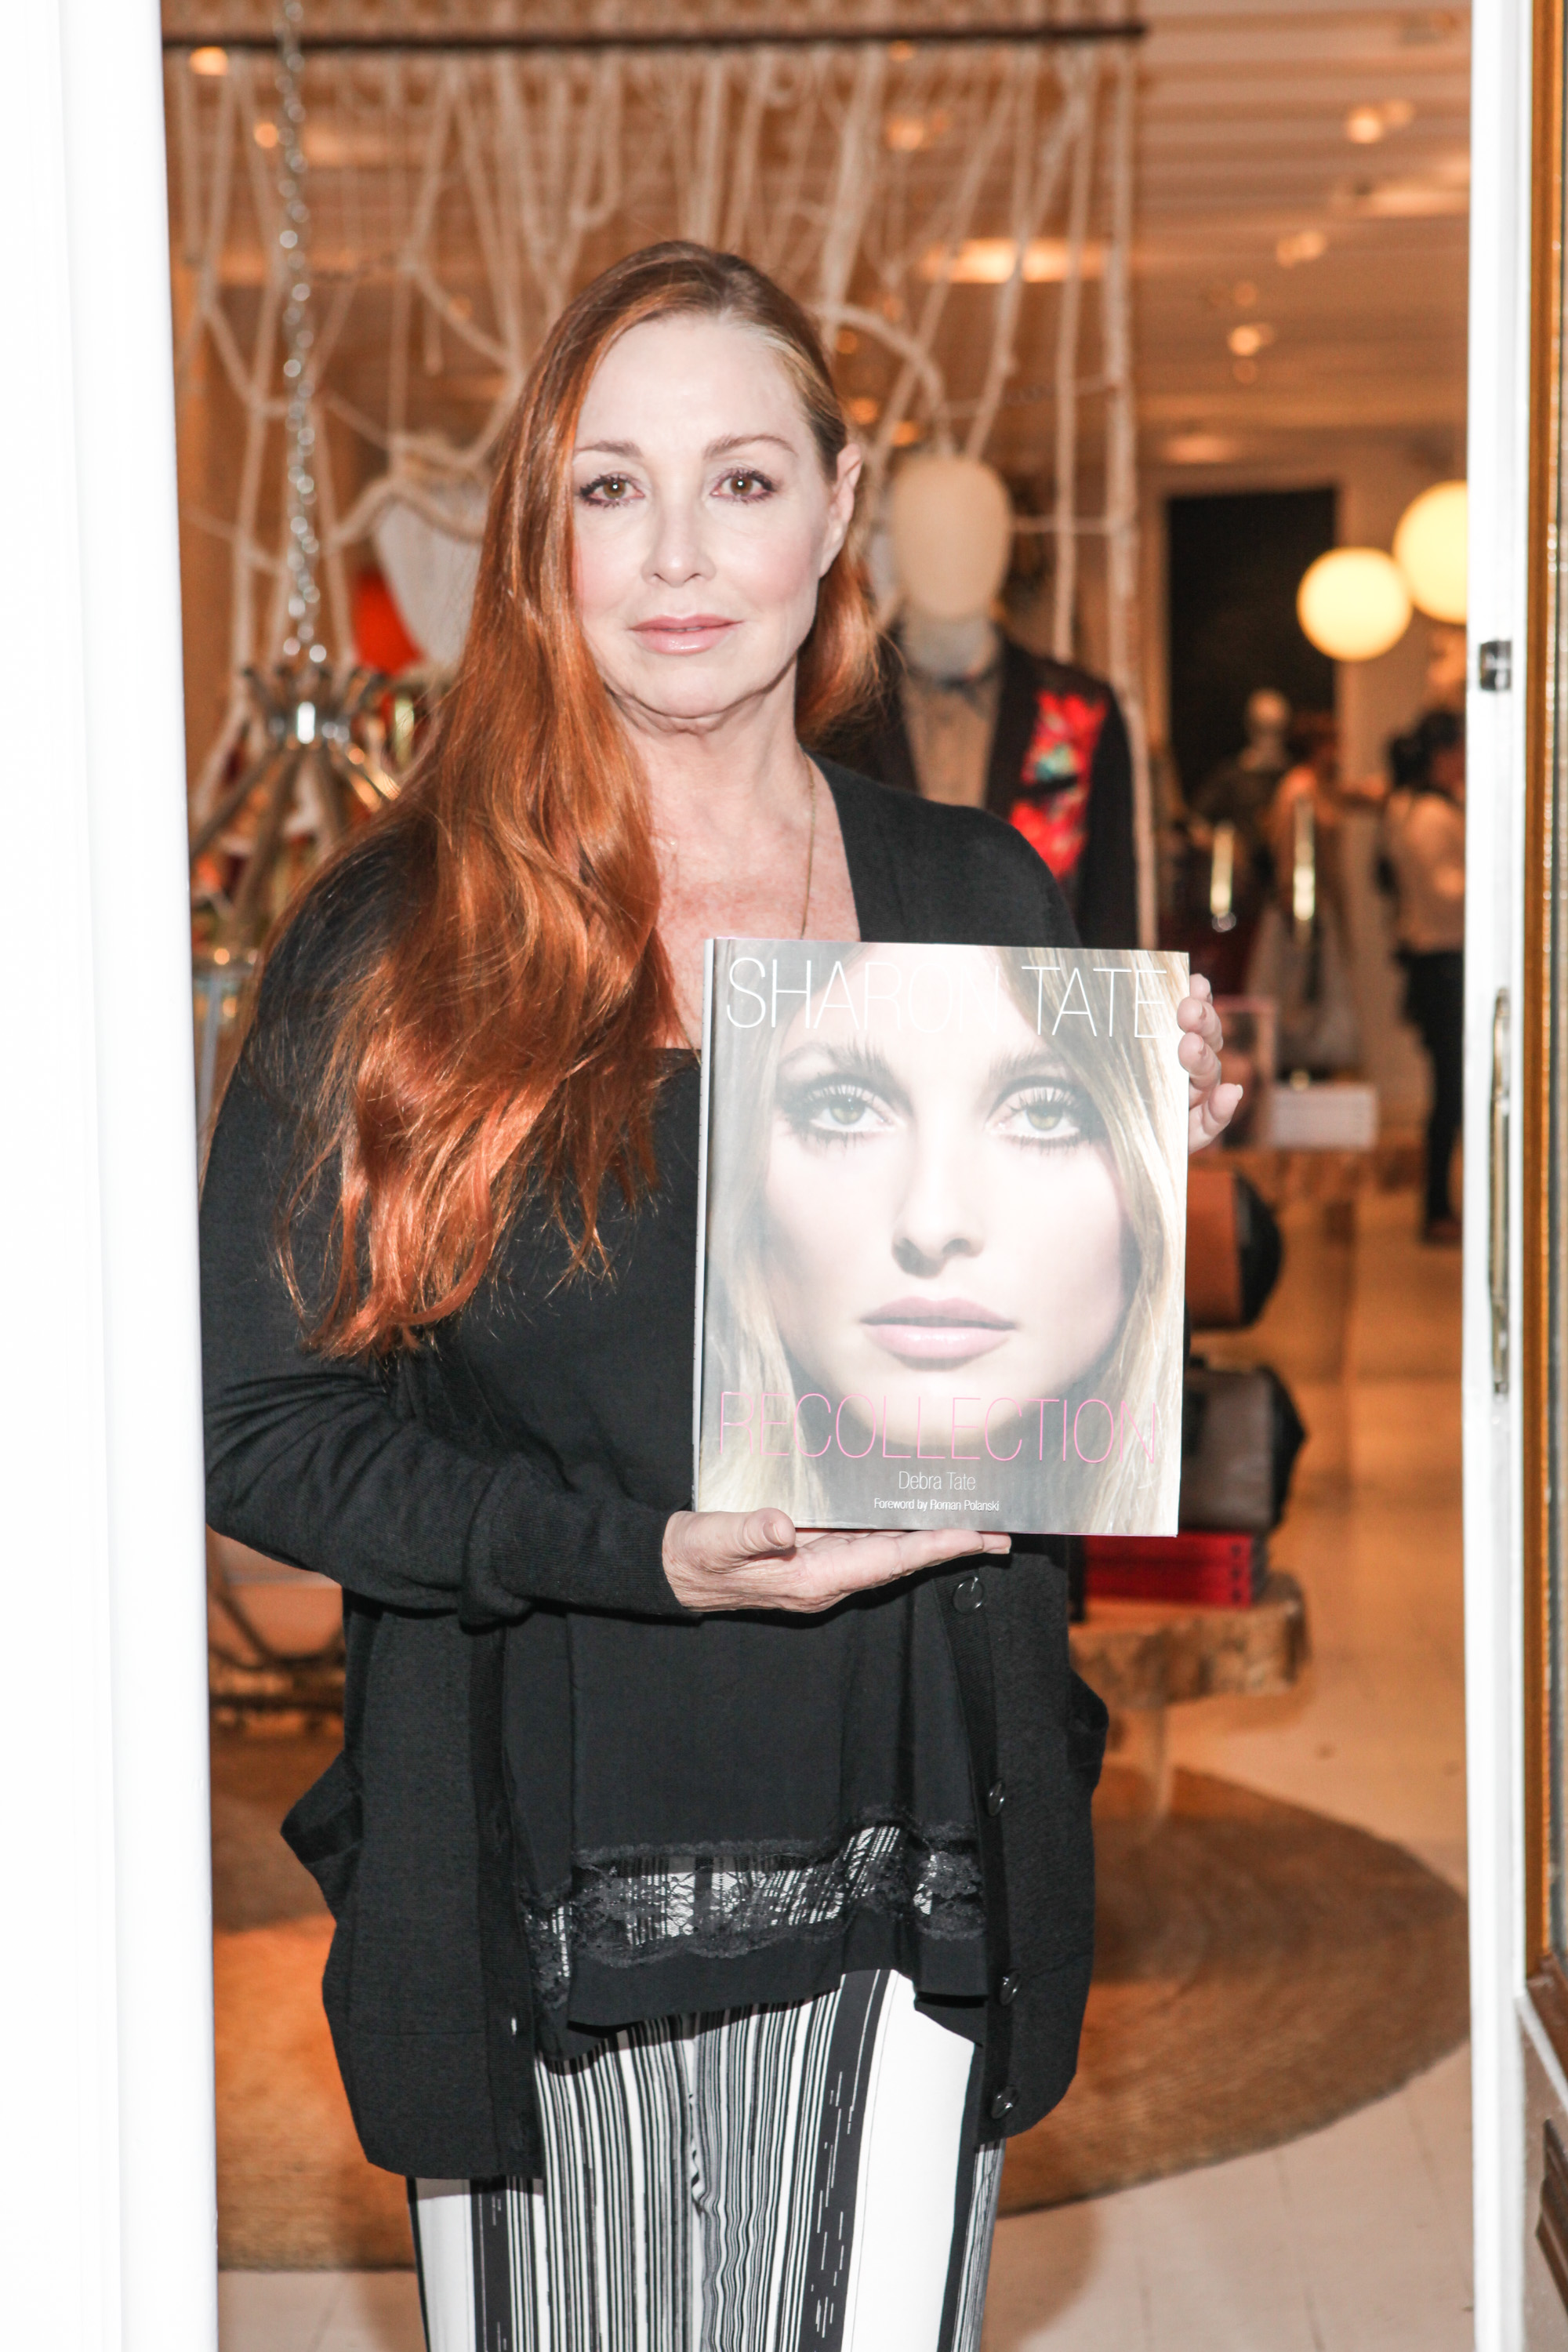 Author Debra Tate attends the signing for her book "Sharon Tate: Recollection" on October 21, 2014 in New York City. (Steve Zak—Getty Images)